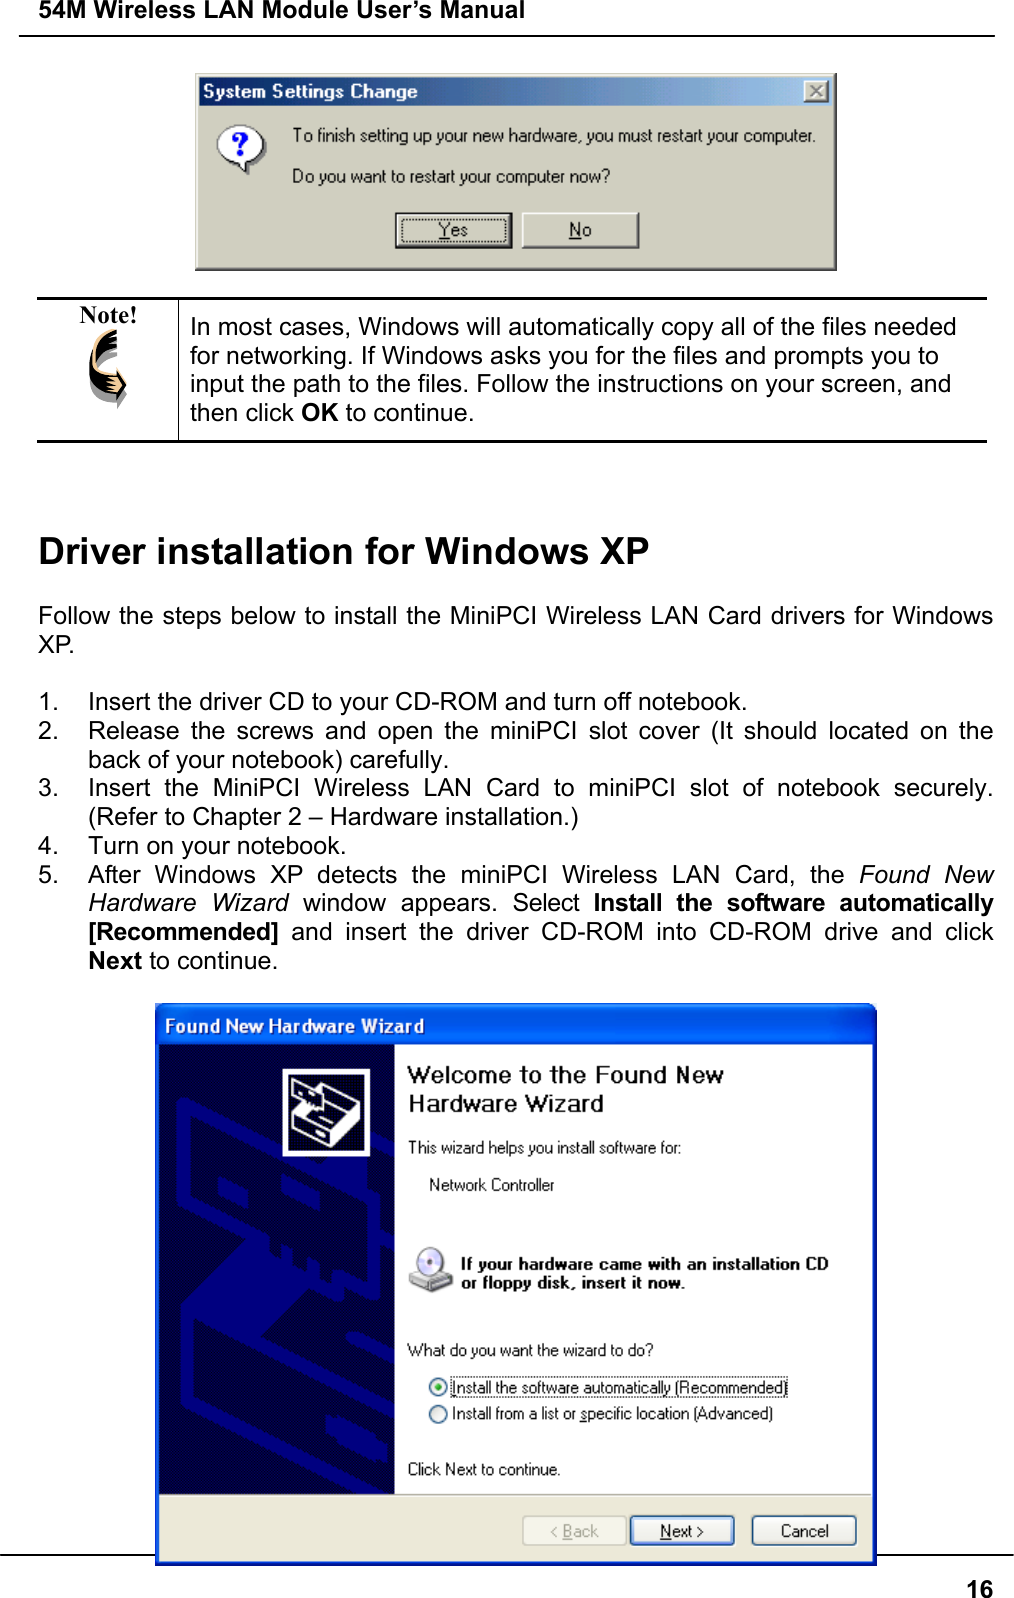 54M Wireless LAN Module User’s Manual  16  Note!  In most cases, Windows will automatically copy all of the files needed for networking. If Windows asks you for the files and prompts you to input the path to the files. Follow the instructions on your screen, and then click OK to continue.    Driver installation for Windows XP  Follow the steps below to install the MiniPCI Wireless LAN Card drivers for Windows XP.  1.  Insert the driver CD to your CD-ROM and turn off notebook. 2.  Release the screws and open the miniPCI slot cover (It should located on the back of your notebook) carefully. 3.  Insert the MiniPCI Wireless LAN Card to miniPCI slot of notebook securely. (Refer to Chapter 2 – Hardware installation.) 4.  Turn on your notebook. 5.  After Windows XP detects the miniPCI Wireless LAN Card, the Found New Hardware Wizard window appears. Select Install the software automatically [Recommended] and insert the driver CD-ROM into CD-ROM drive and click Next to continue.   